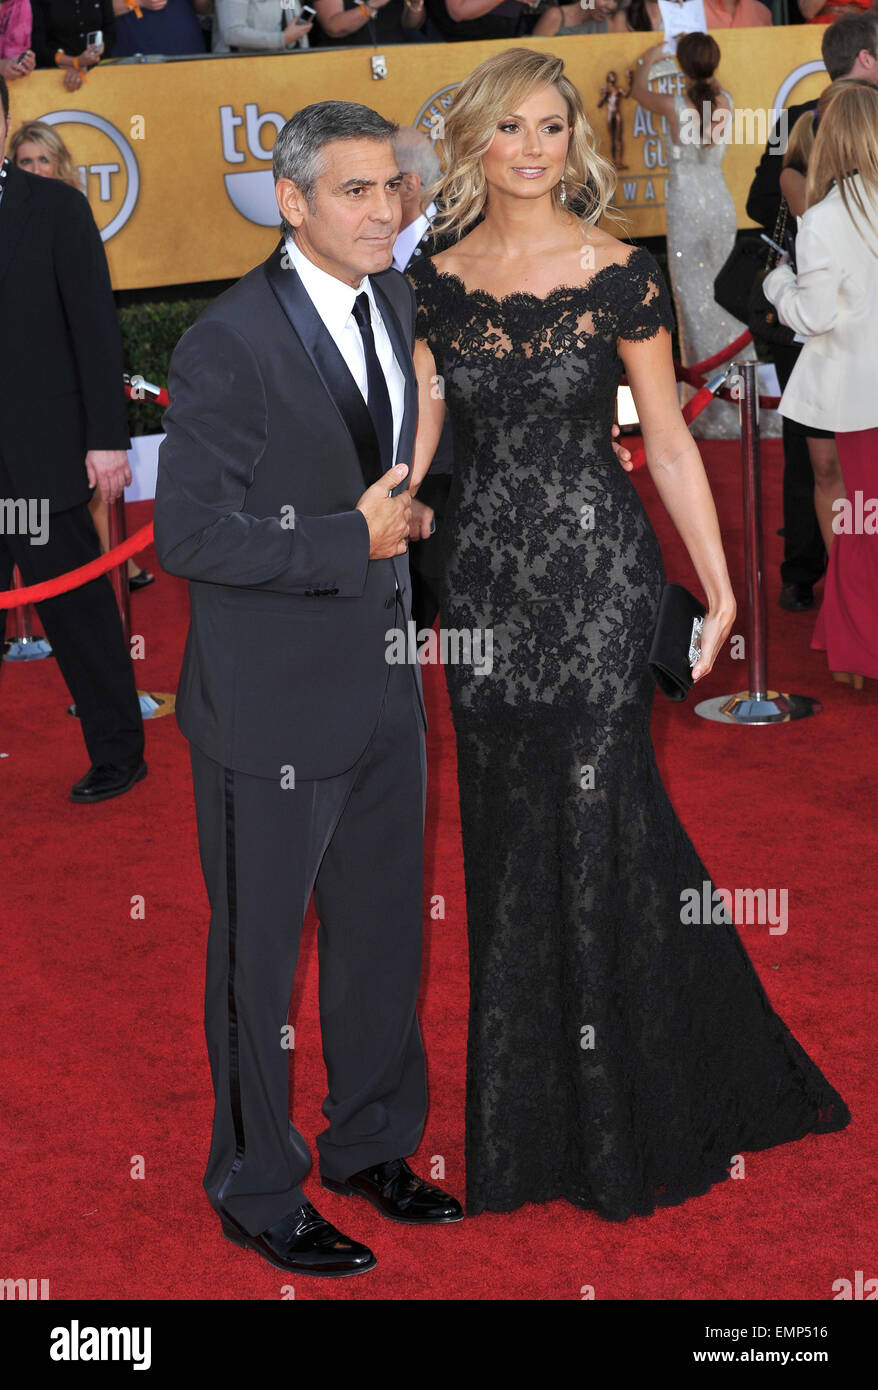 LOS ANGELES, CA - JANUARY 29, 2012: George Clooney & Stacy Keibler at the 17th Annual Screen Actors Guild Awards at the Shrine Auditorium, Los Angeles. January 29, 2012 Los Angeles, CA Stock Photo